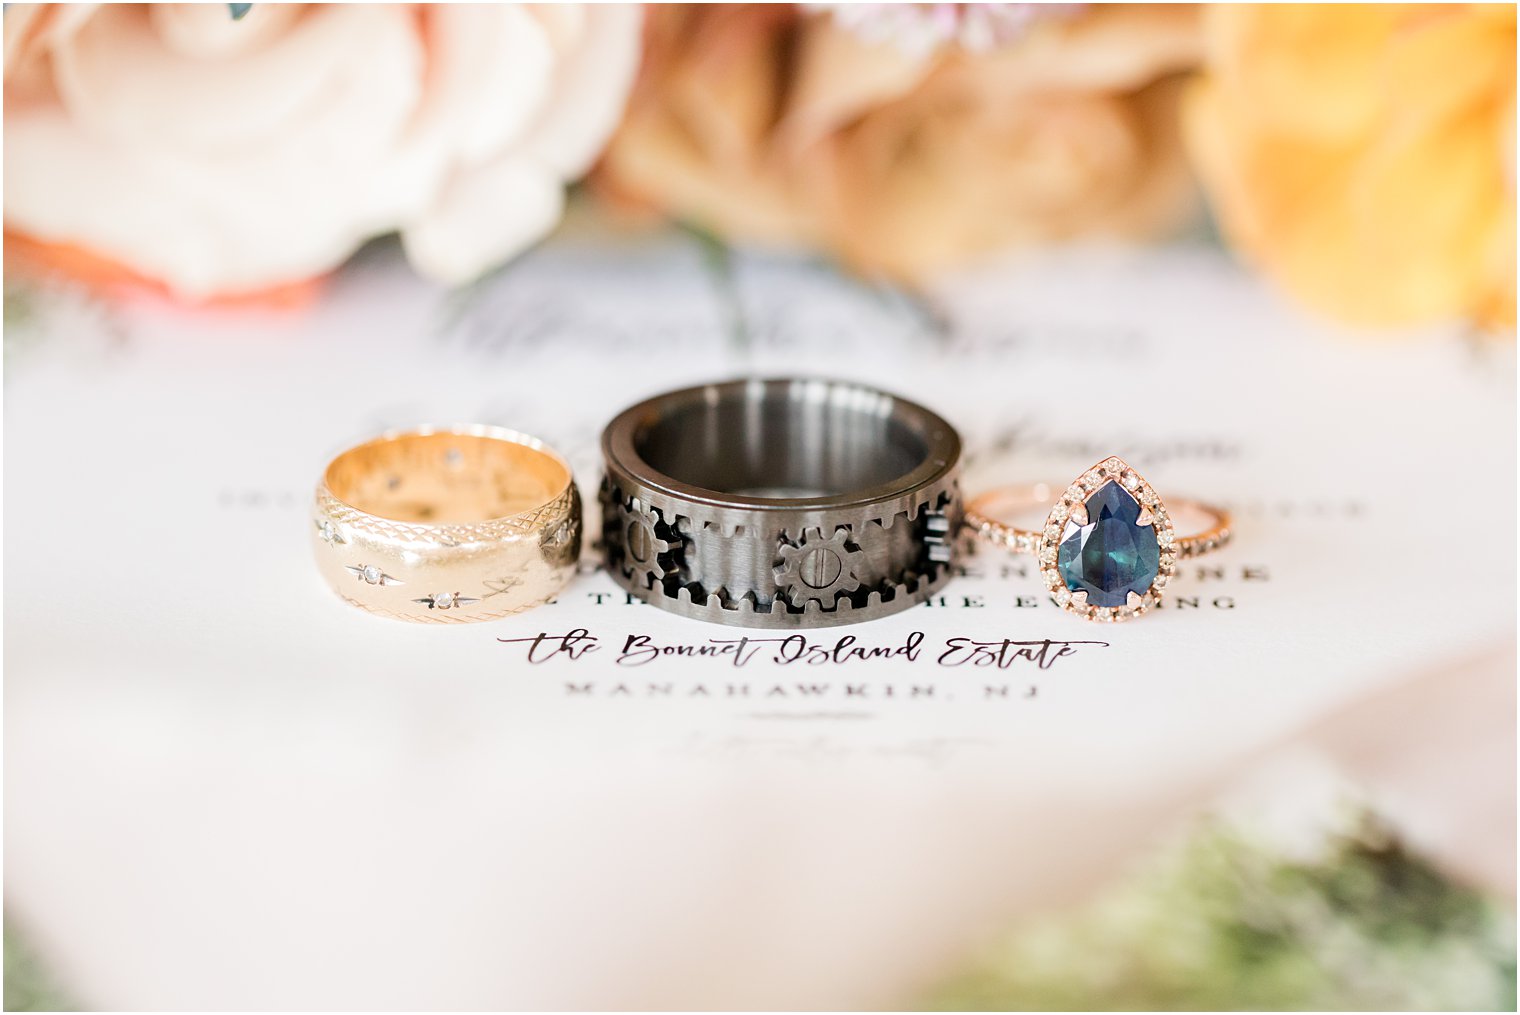 bride and groom's custom jewelry for wedding day at Bonnet Island Estate